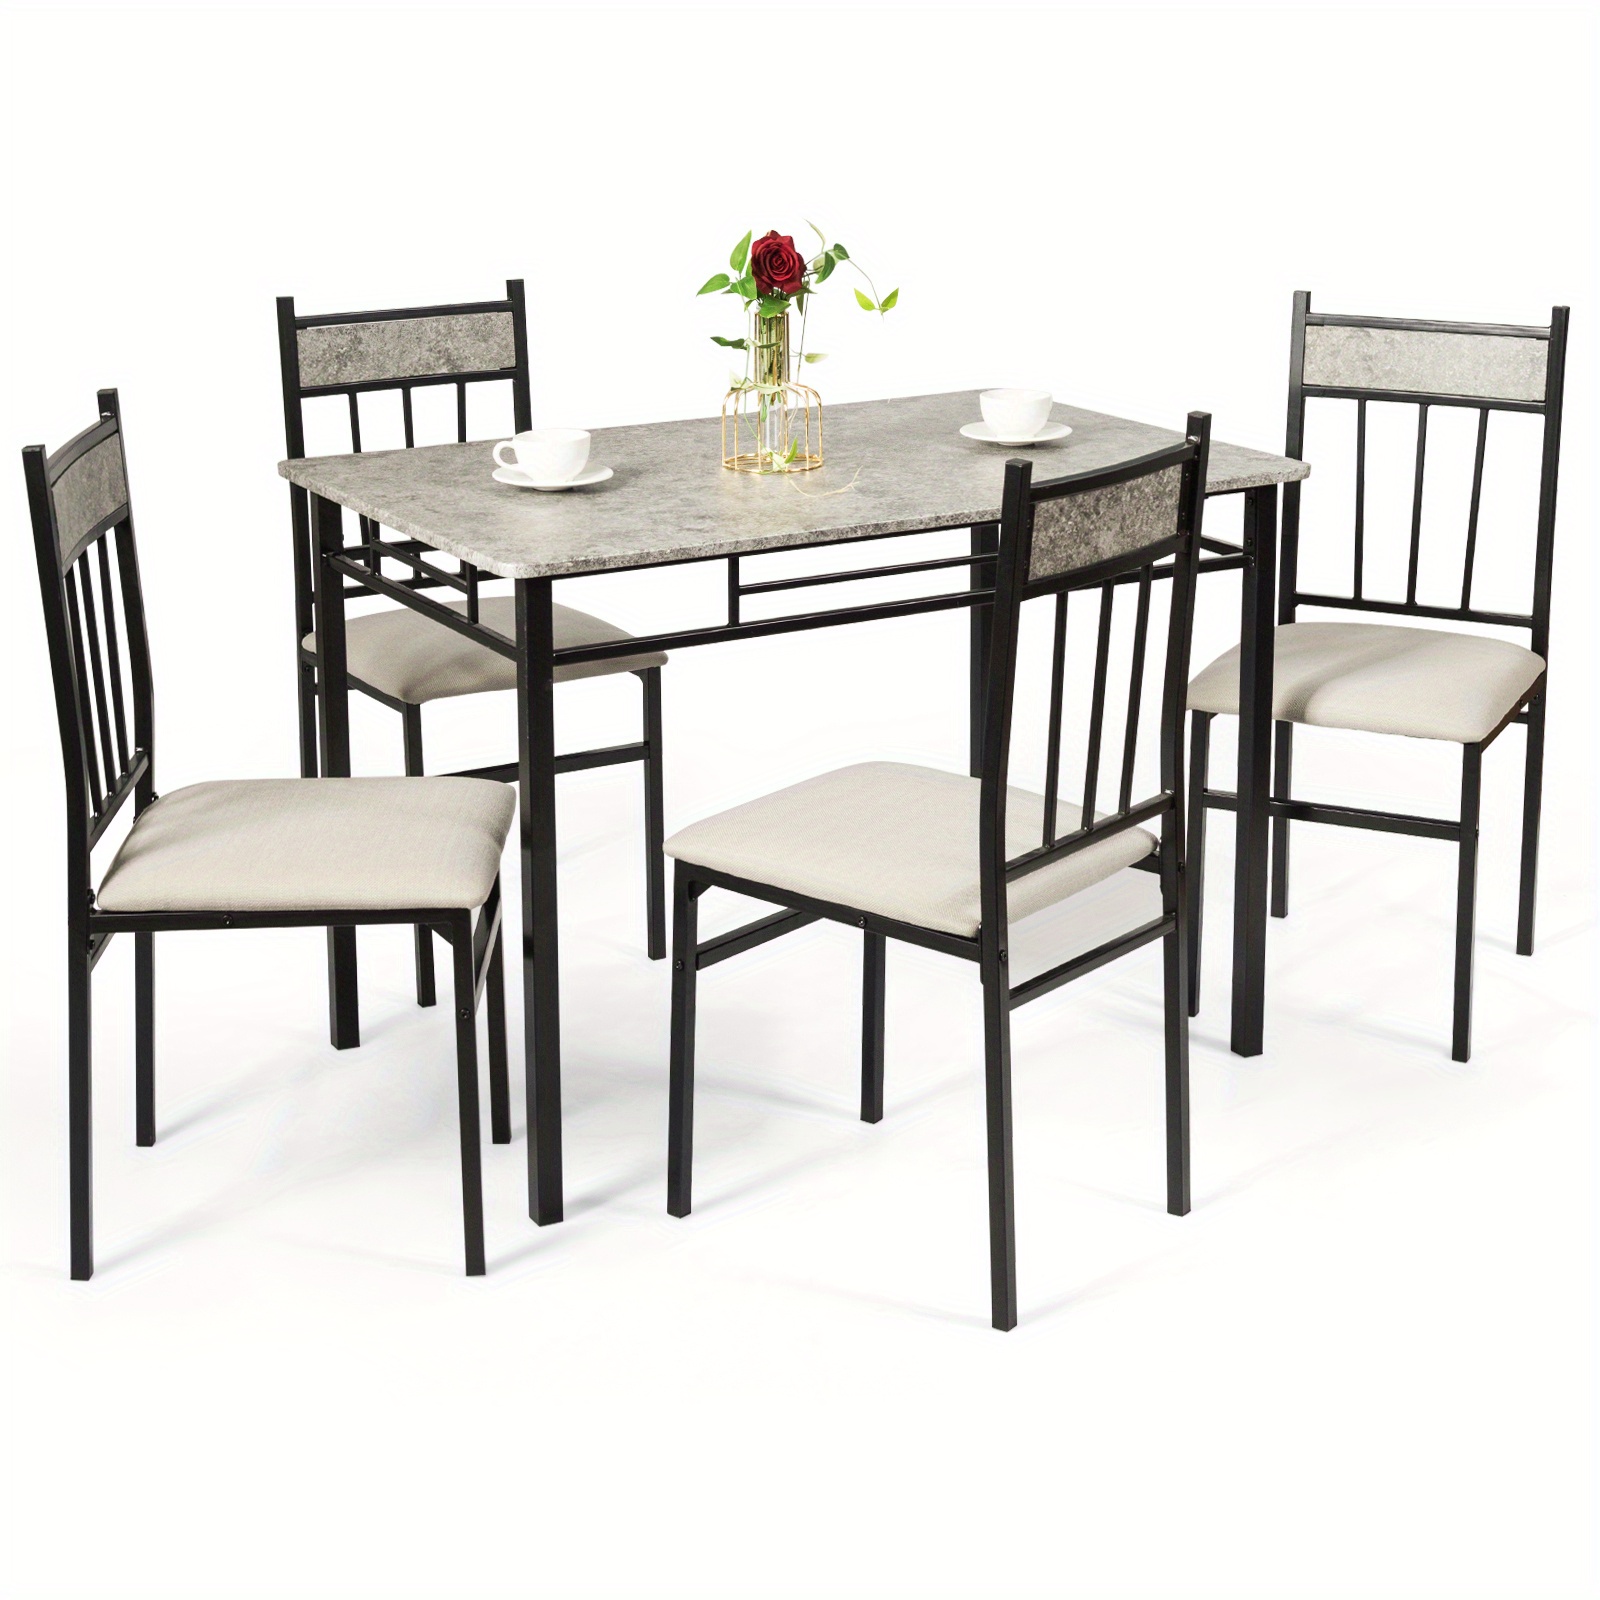 

Maxmass 5 Piece Dining Set Faux Marble Top Table And 4 Padded Seat Chairs W/ Metal Legs